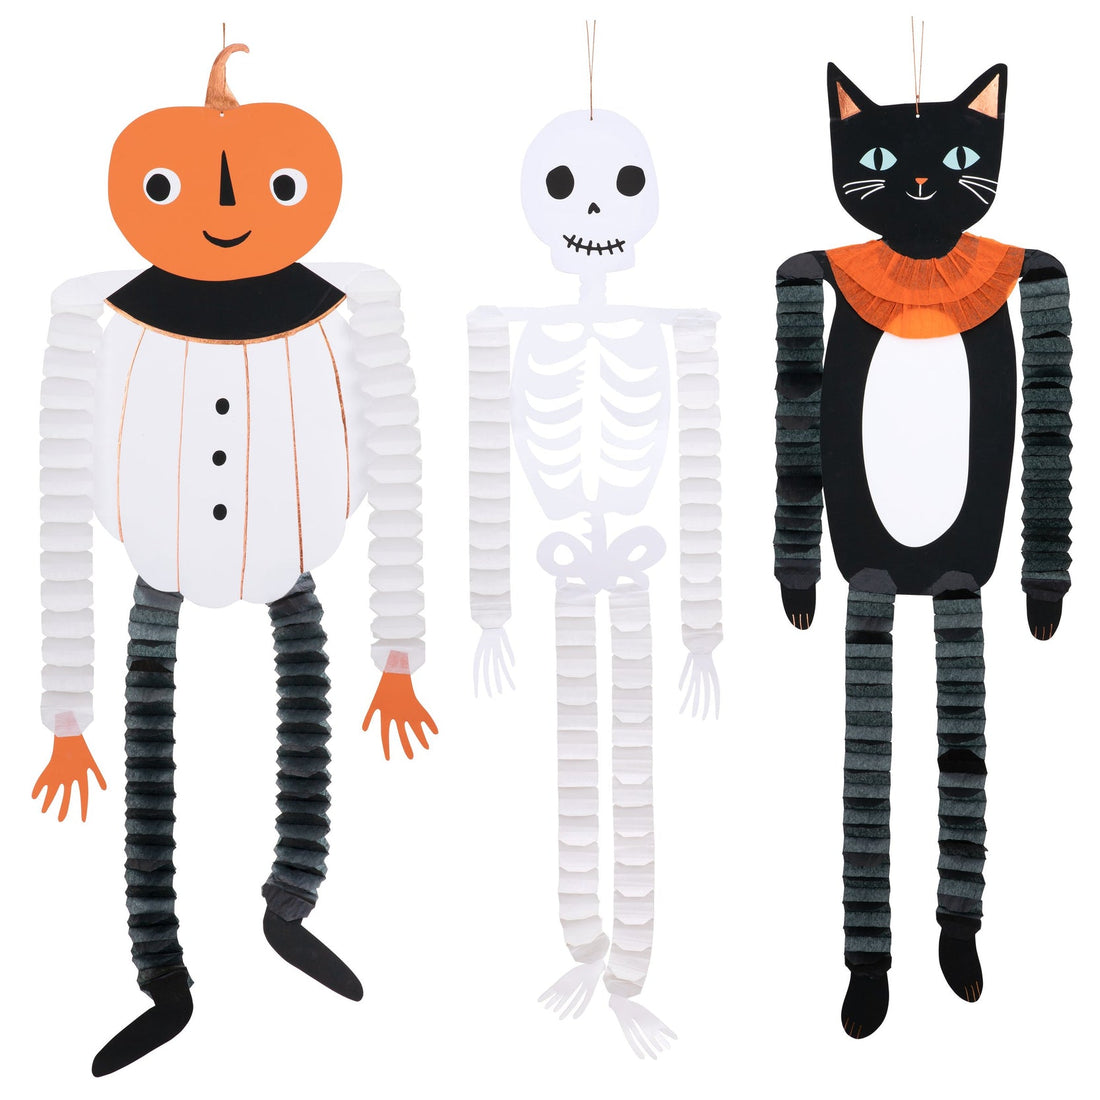 3 happy Halloween icons - a skeleton, black cat and pumpkin - with amusing dangling honeycomb legs and arms